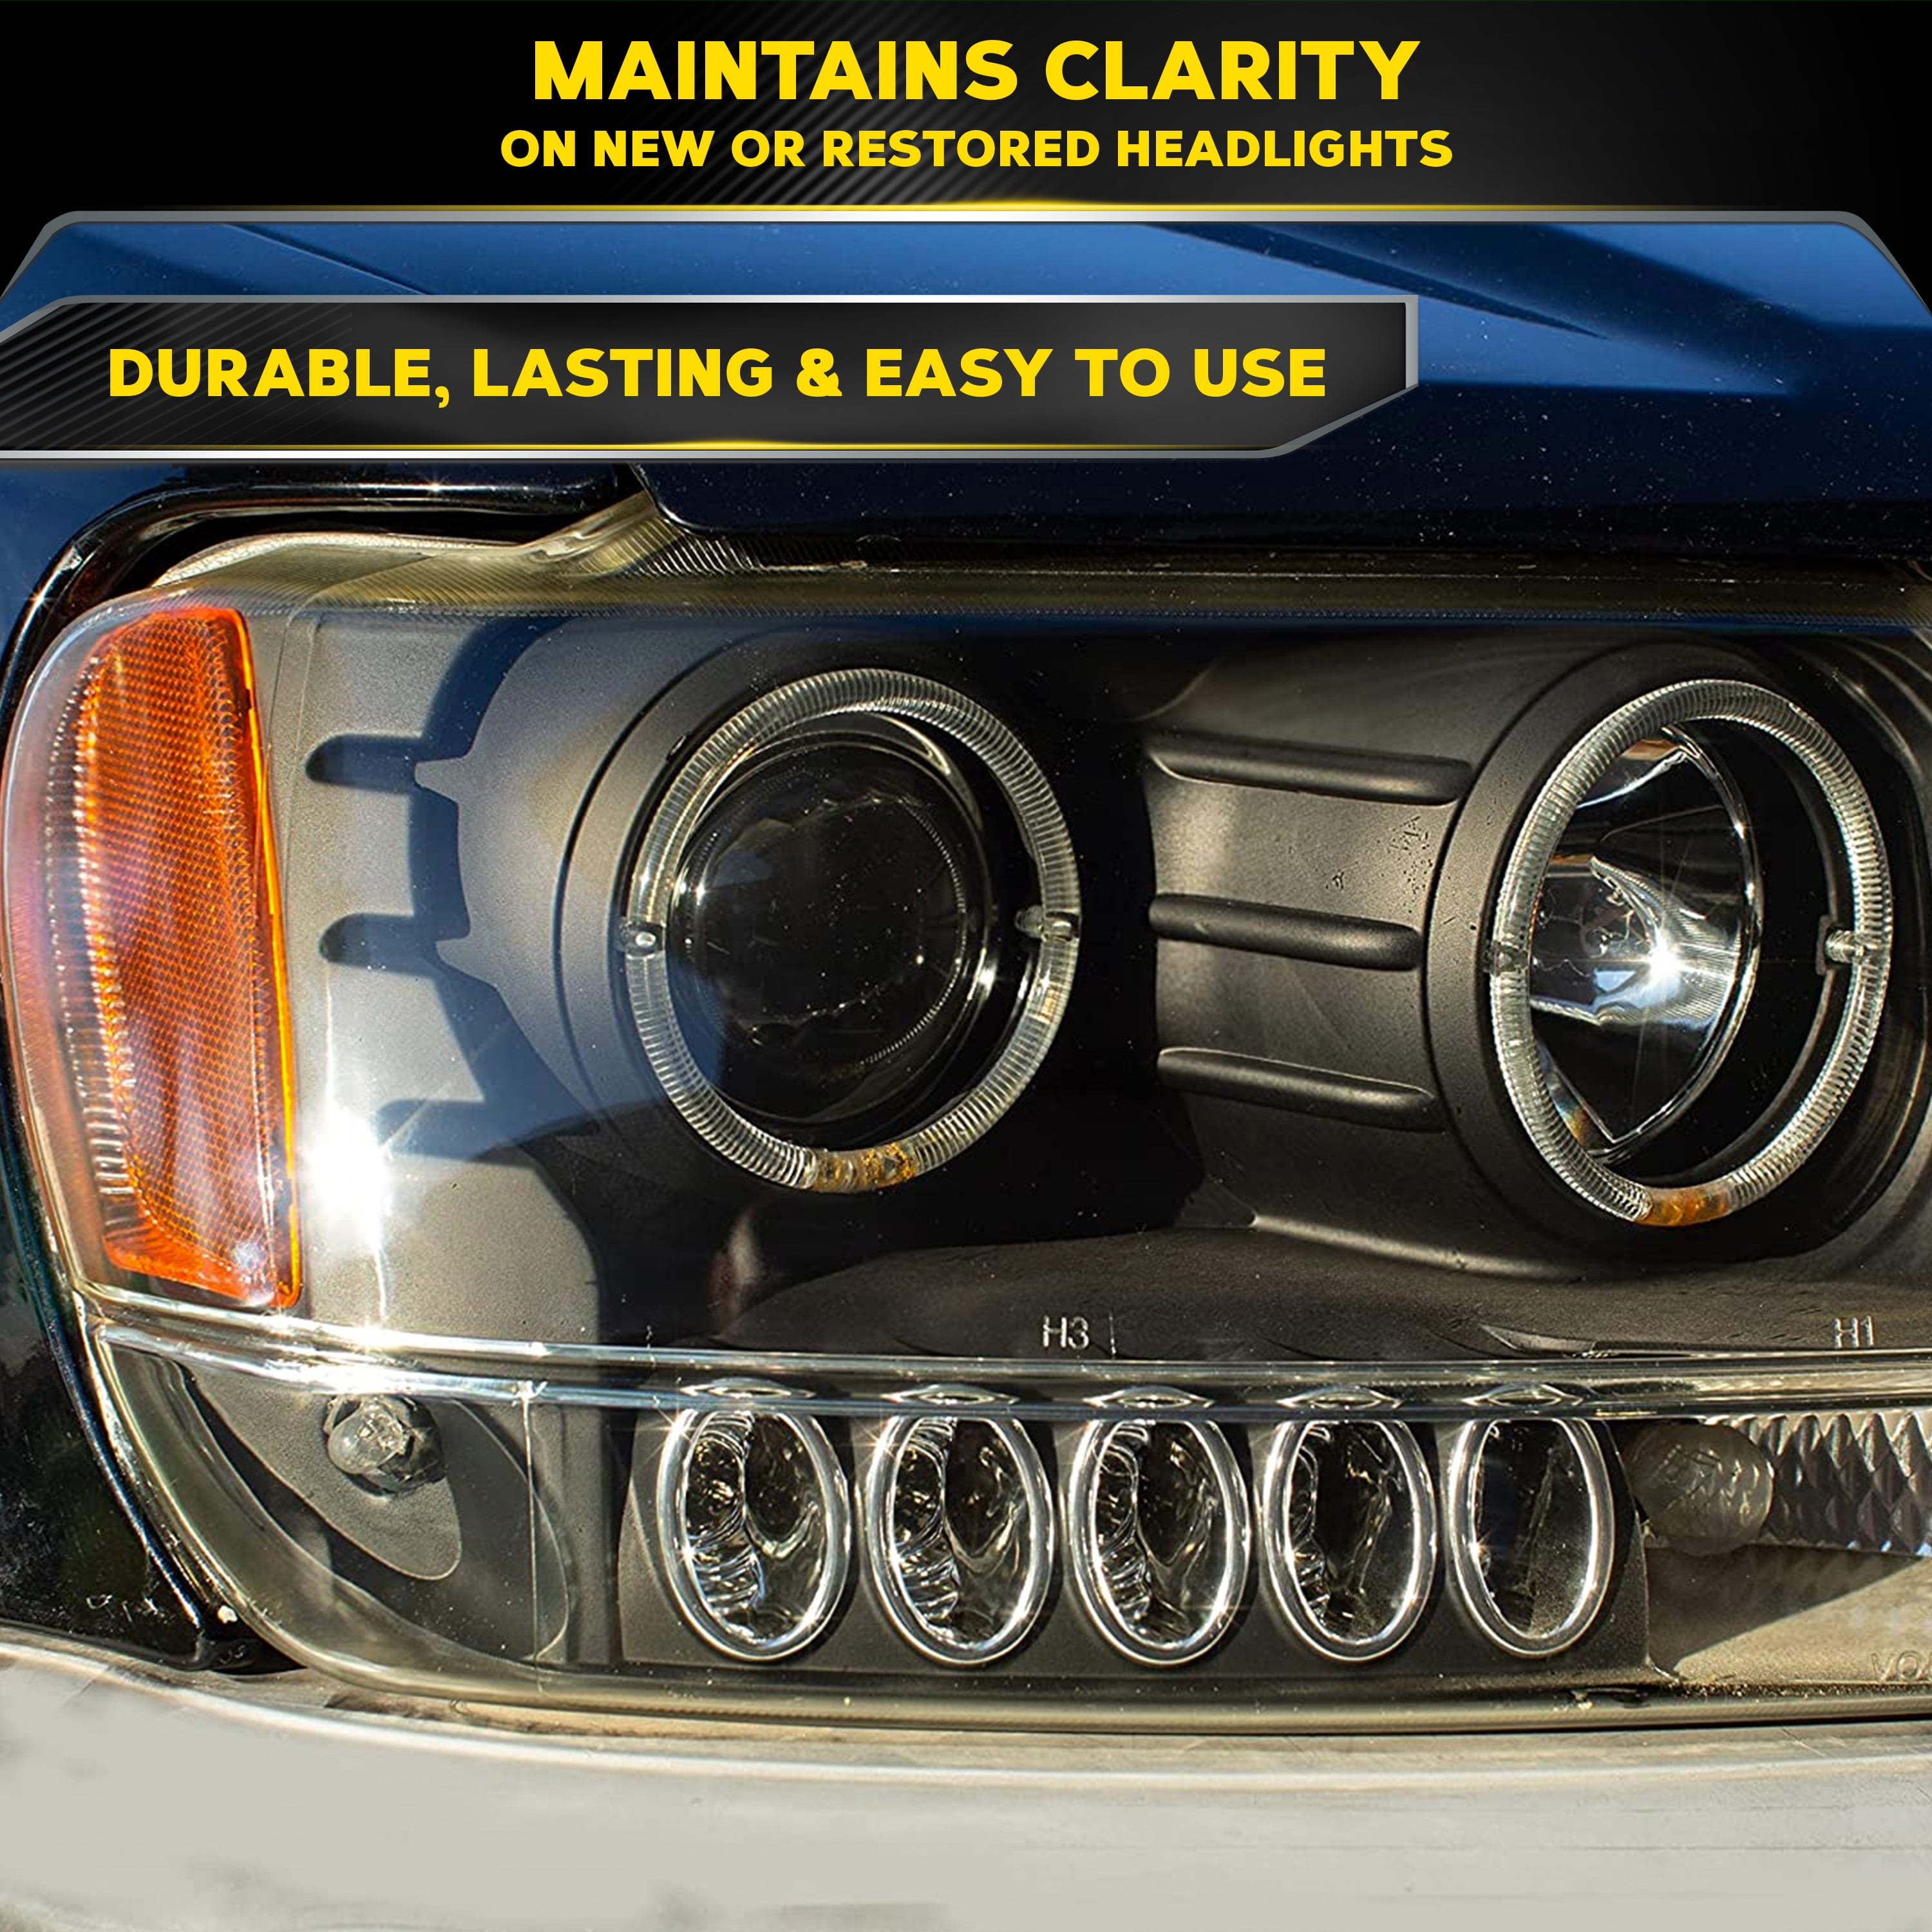 Meguiar's - Unfortunatelyclear plastic headlights can start to yellow,  cloud and haze in just a few years decreasing how well your headlights work  and making your car or truck look older.😥 FORTUNATELYour